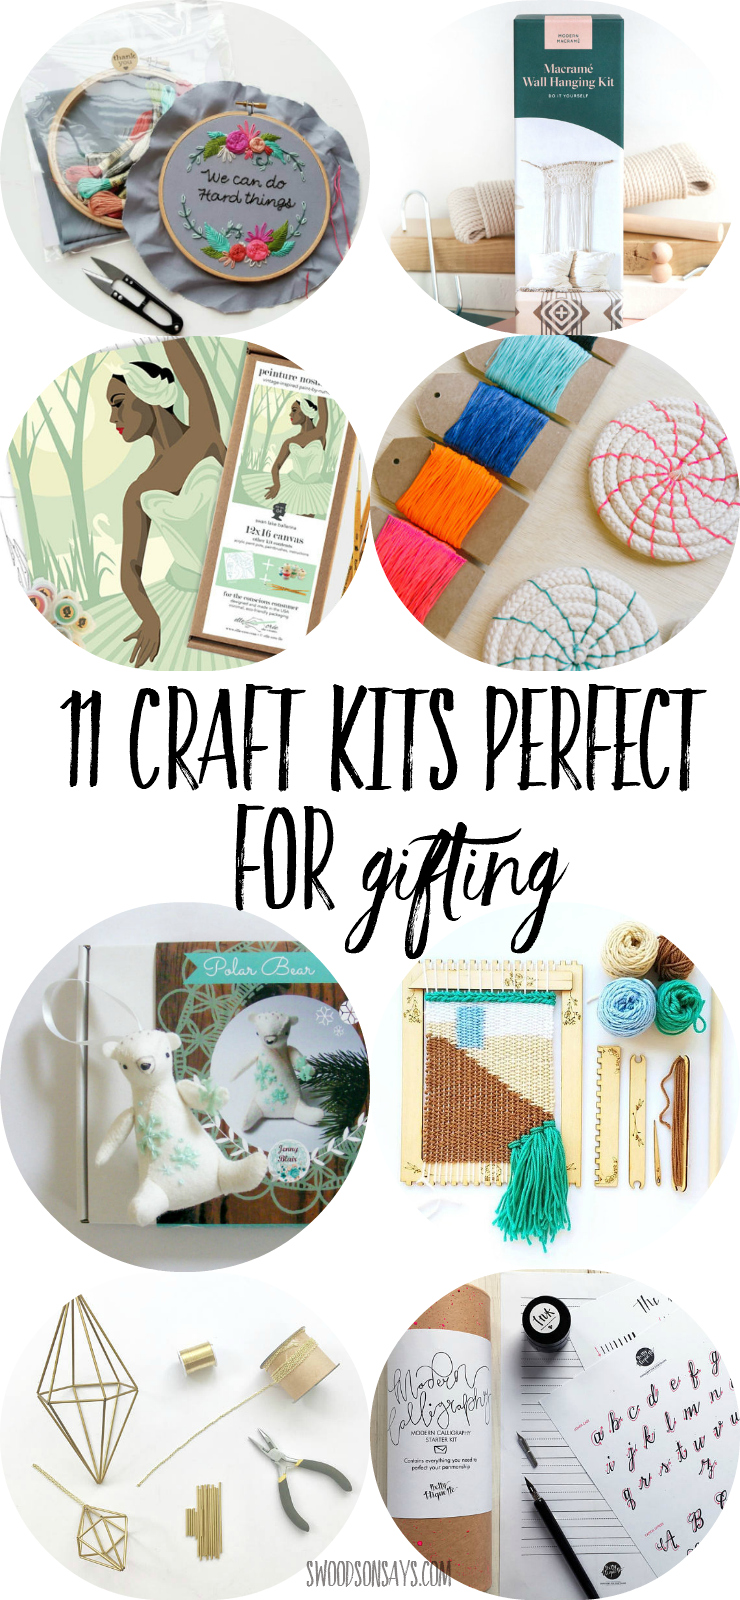 Hunting gift ideas for crafters? Help them try a new medium with these craft kids perfect for gifting! Craft kits mean they don't have to buy any supplies or hunt down tutorials, it is all included. Check out these modern craft kits and get shopping! #craftkit